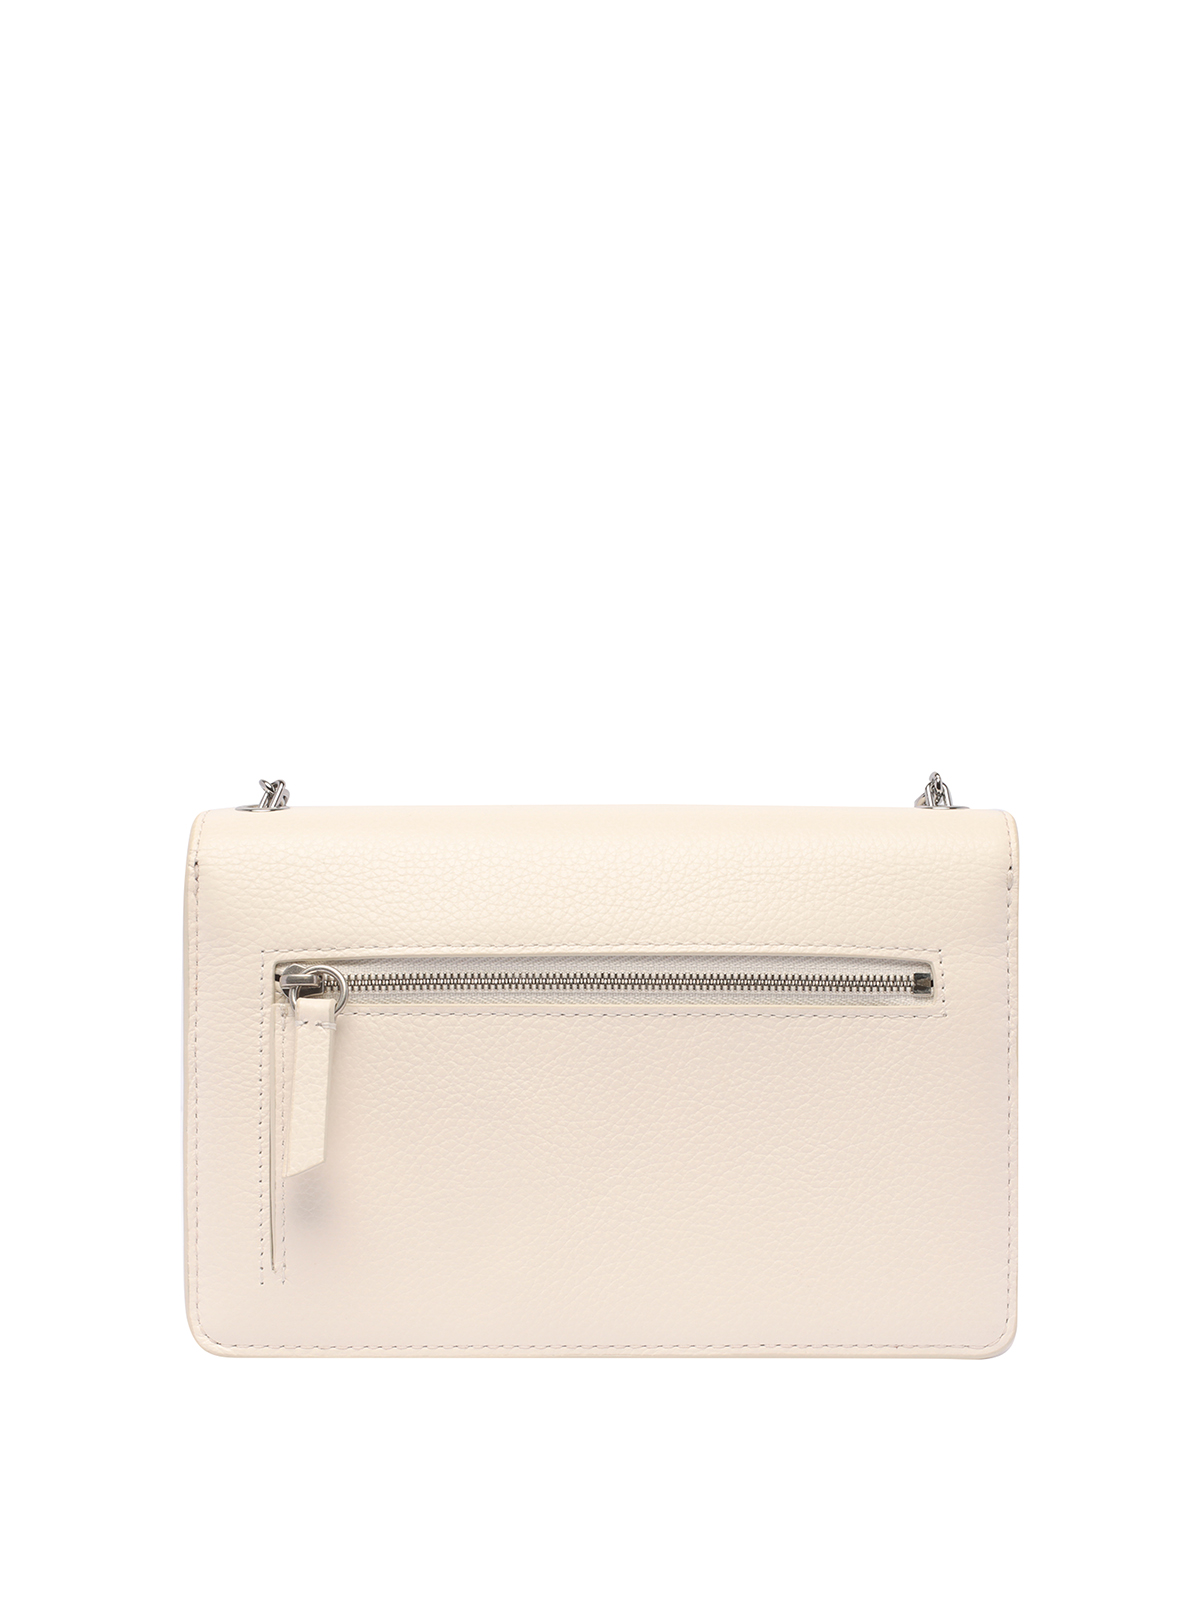 Amberley leather handbag Mulberry White in Leather - 41265534